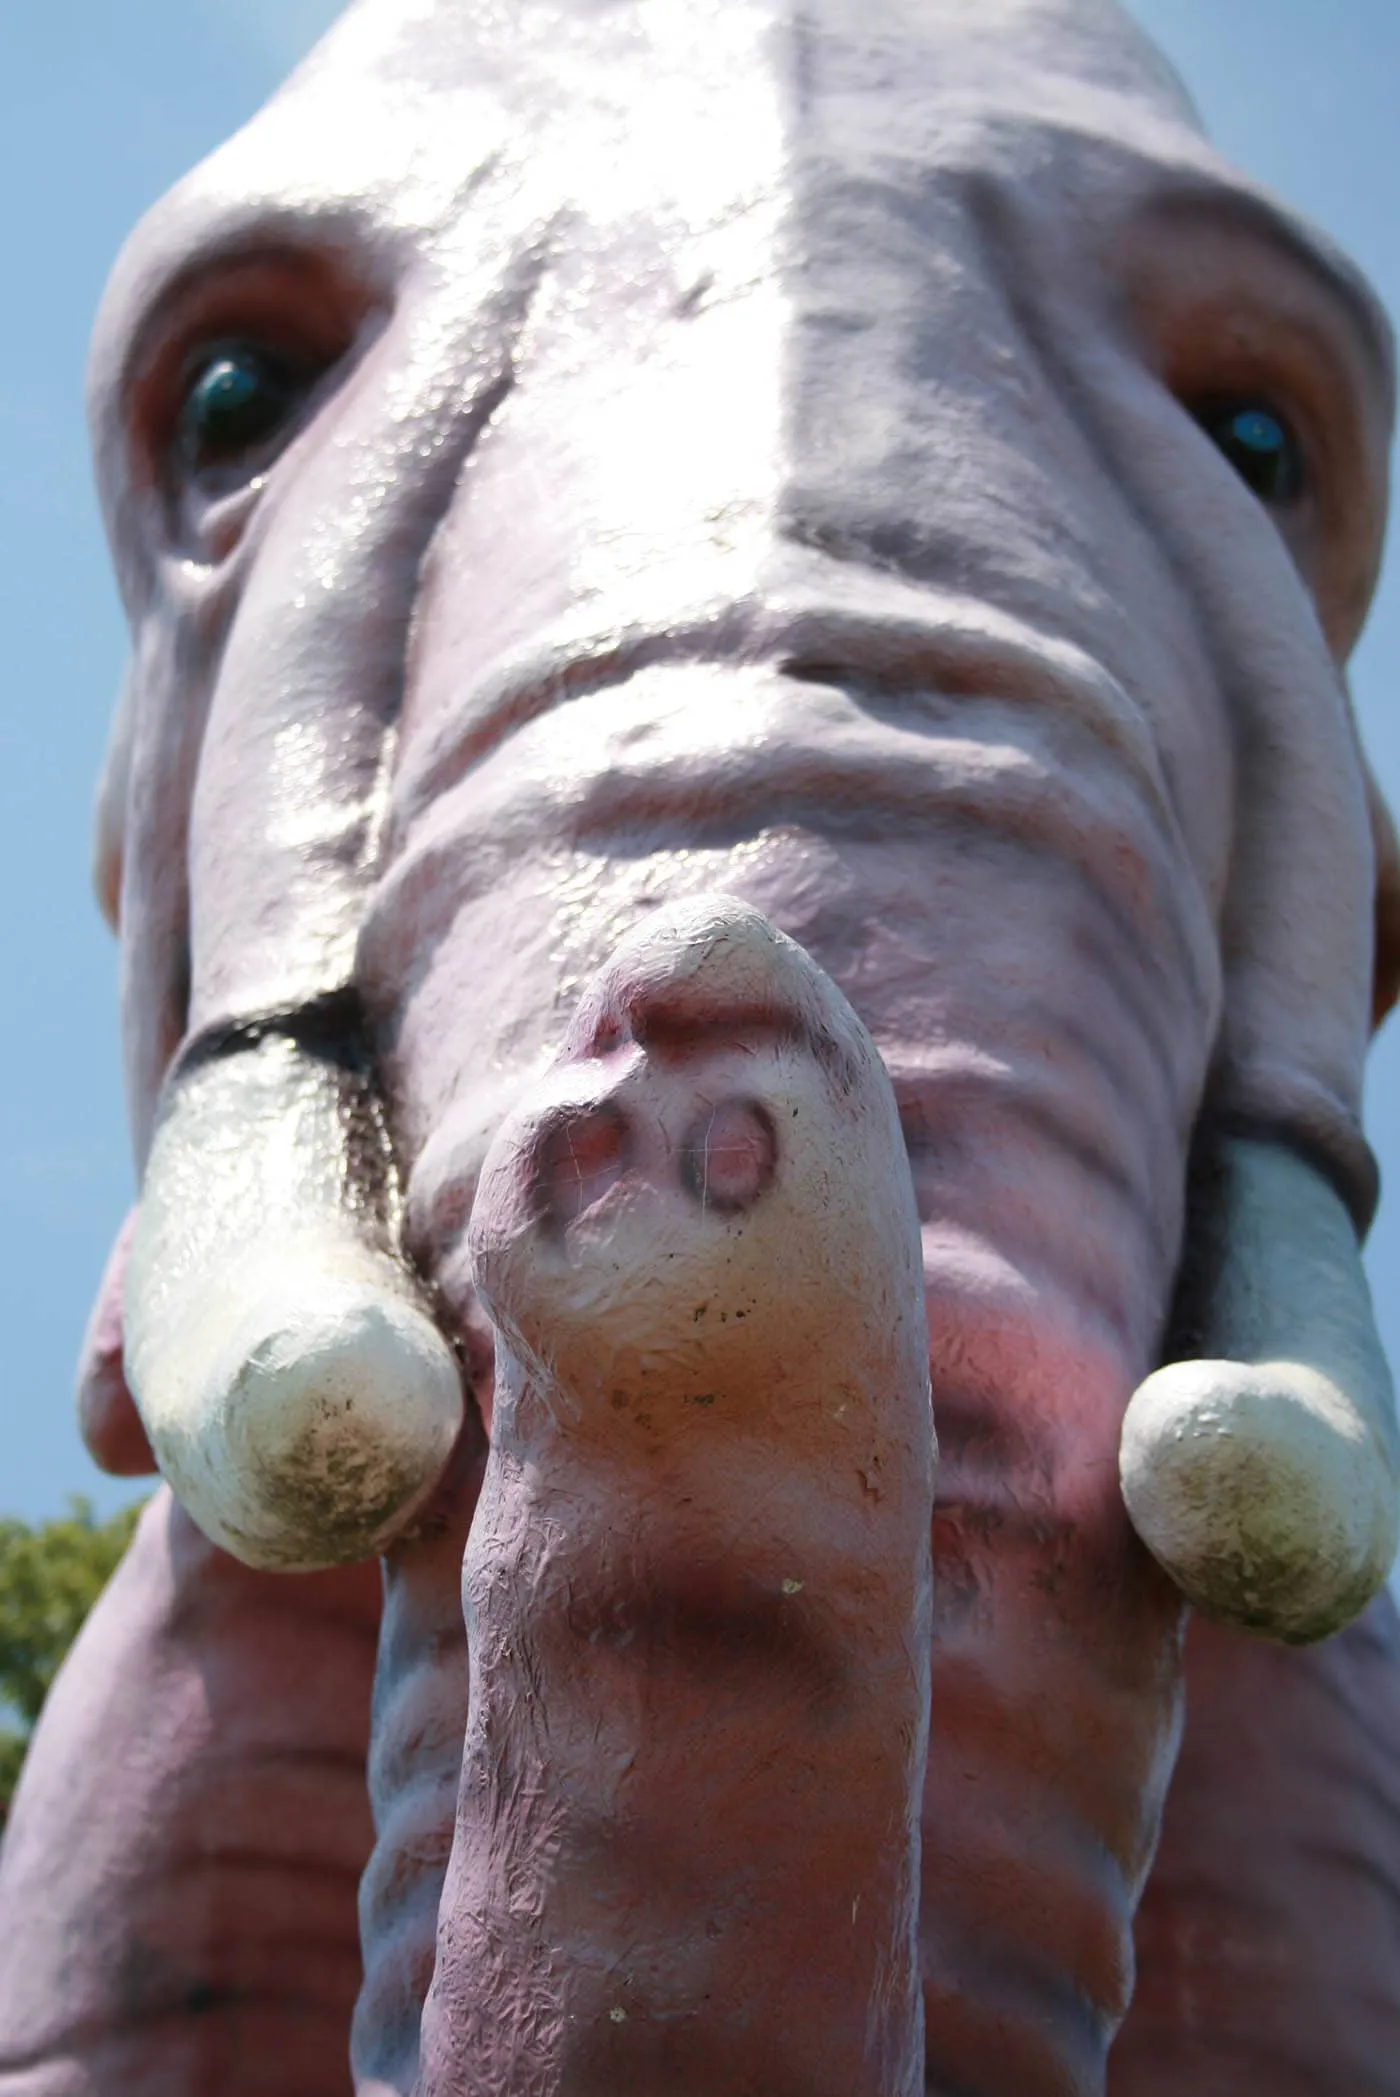 Fiberglass Pink Elephant - a roadside attraction at Pink Elephant Antique Mall in Livingston, Illinois